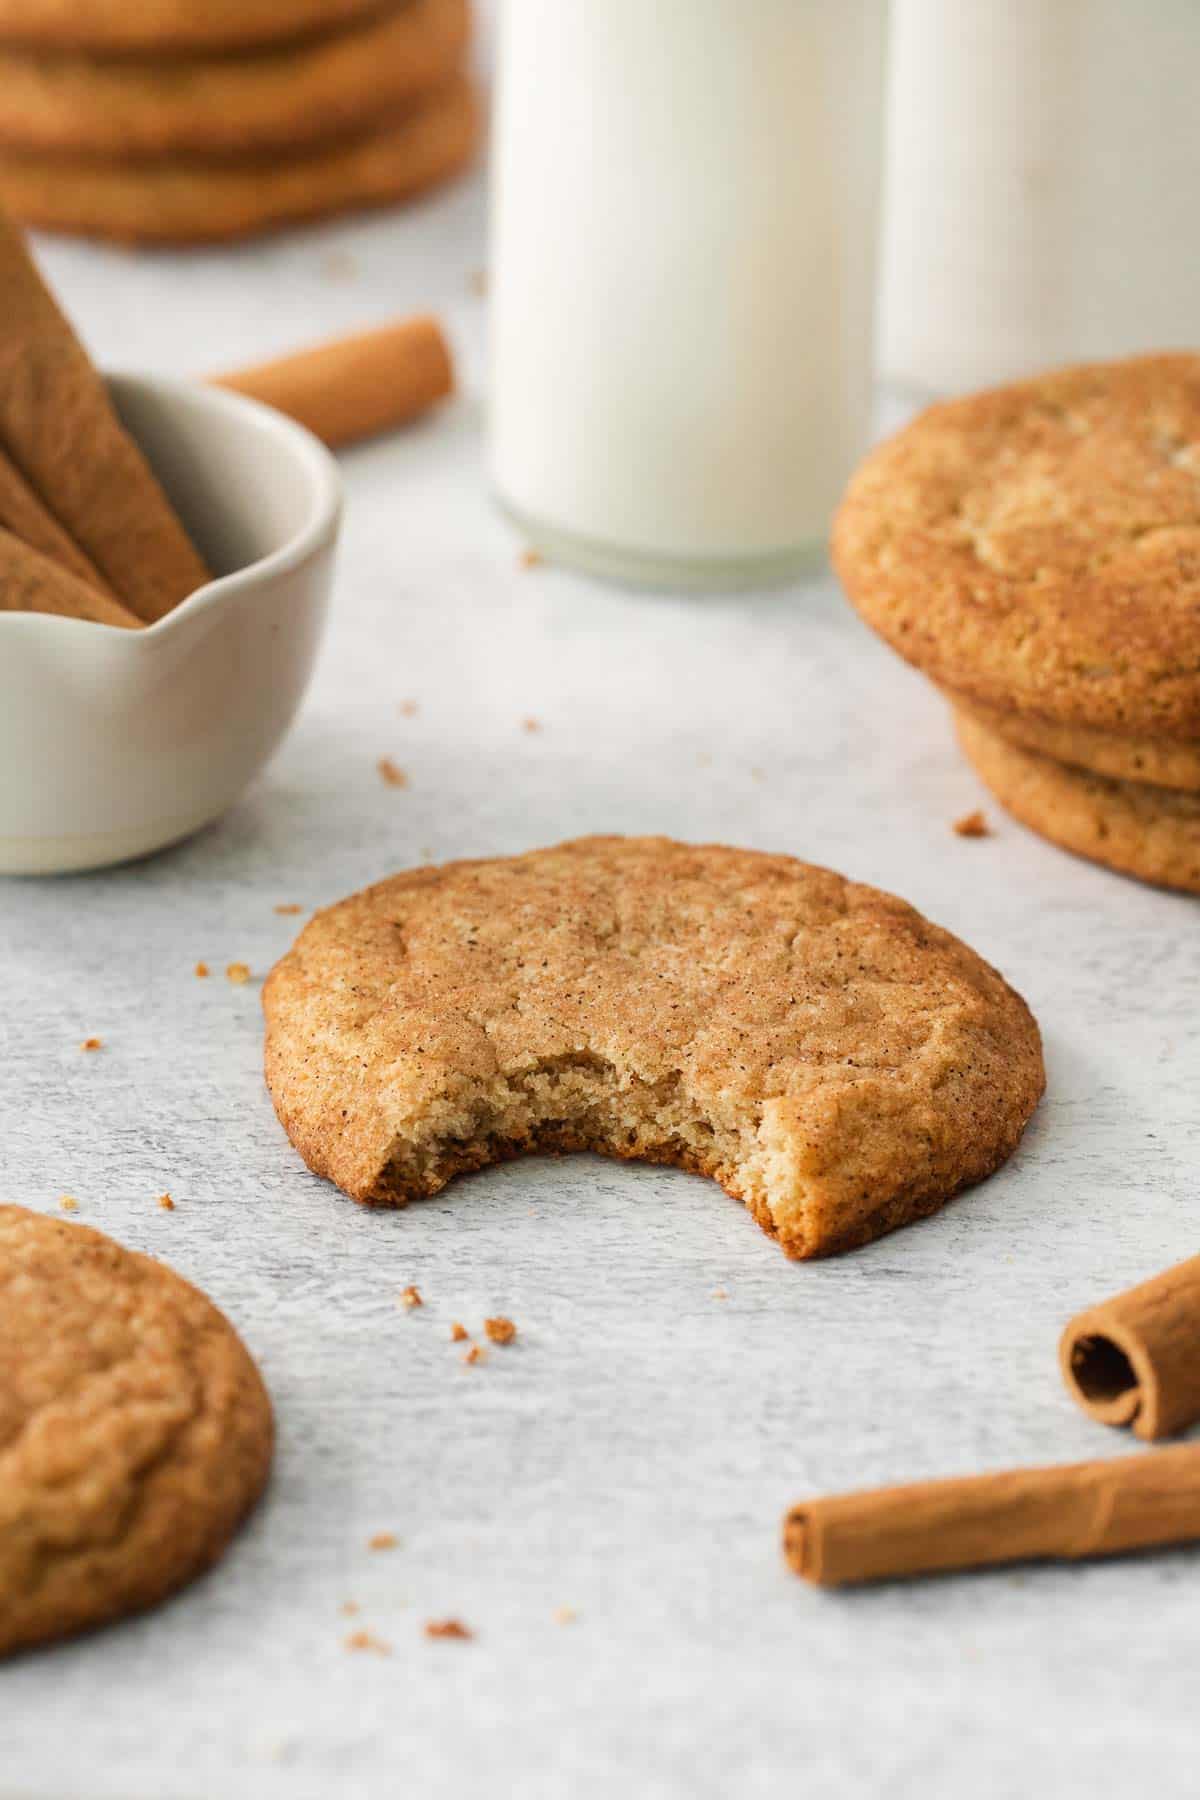 an almond flour snickerdoodle with a bite taken out of it